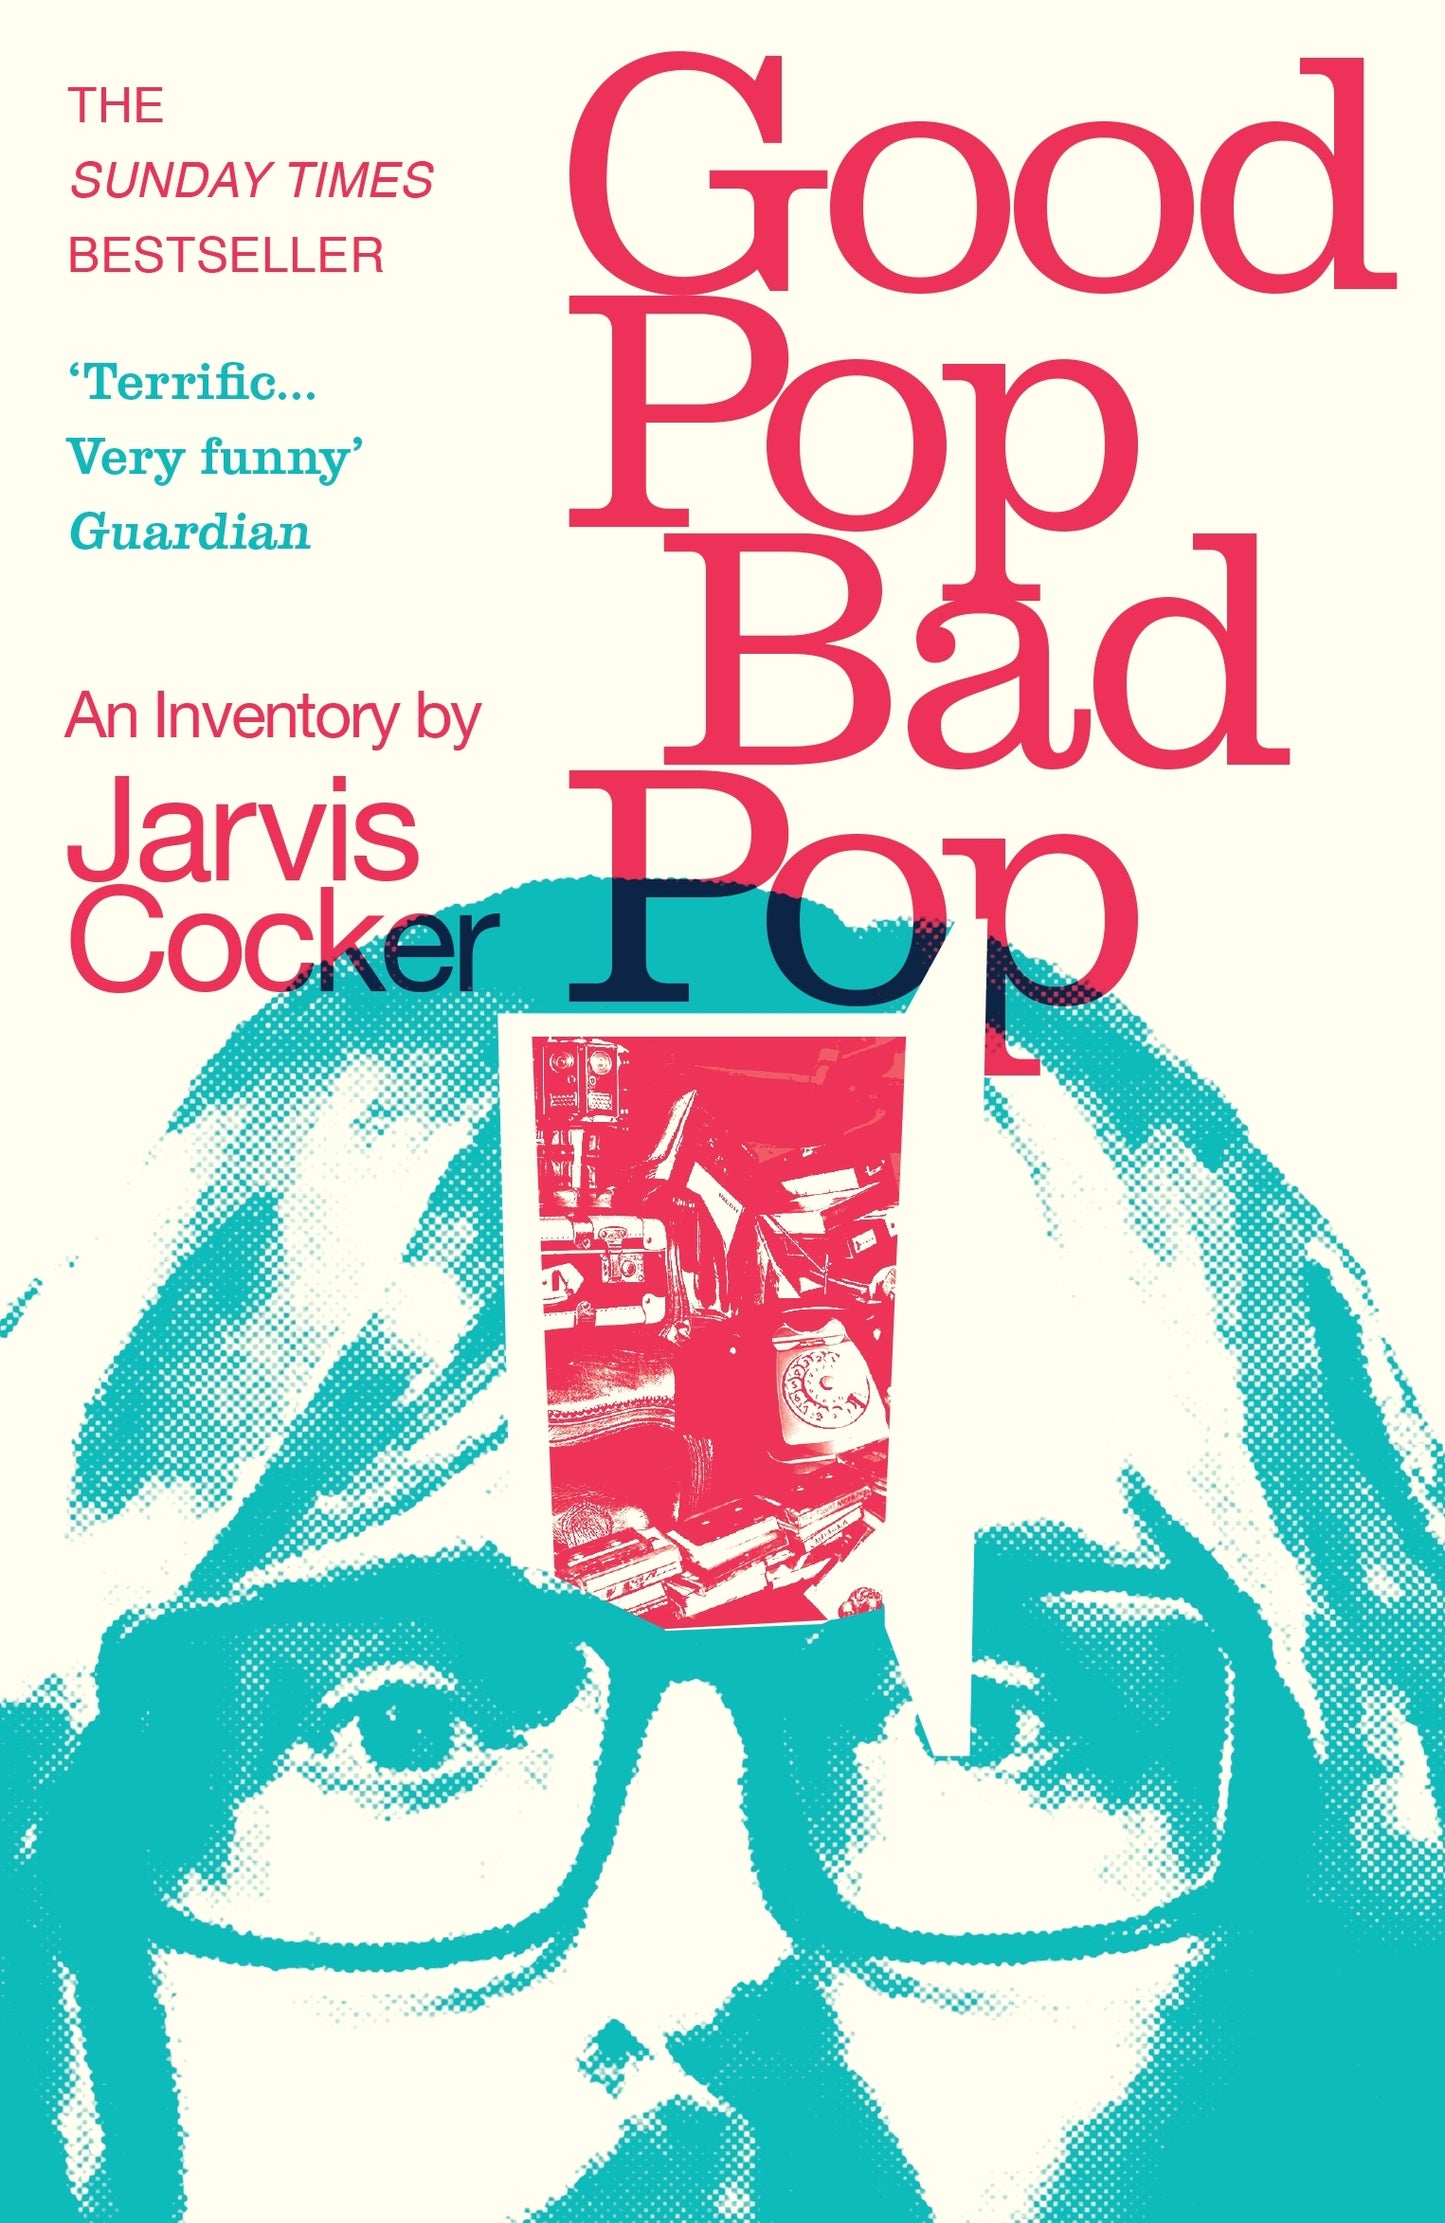 Jarvis Cocker - Good Pop, Bad Pop | Buy the Book from Flying Nun Records